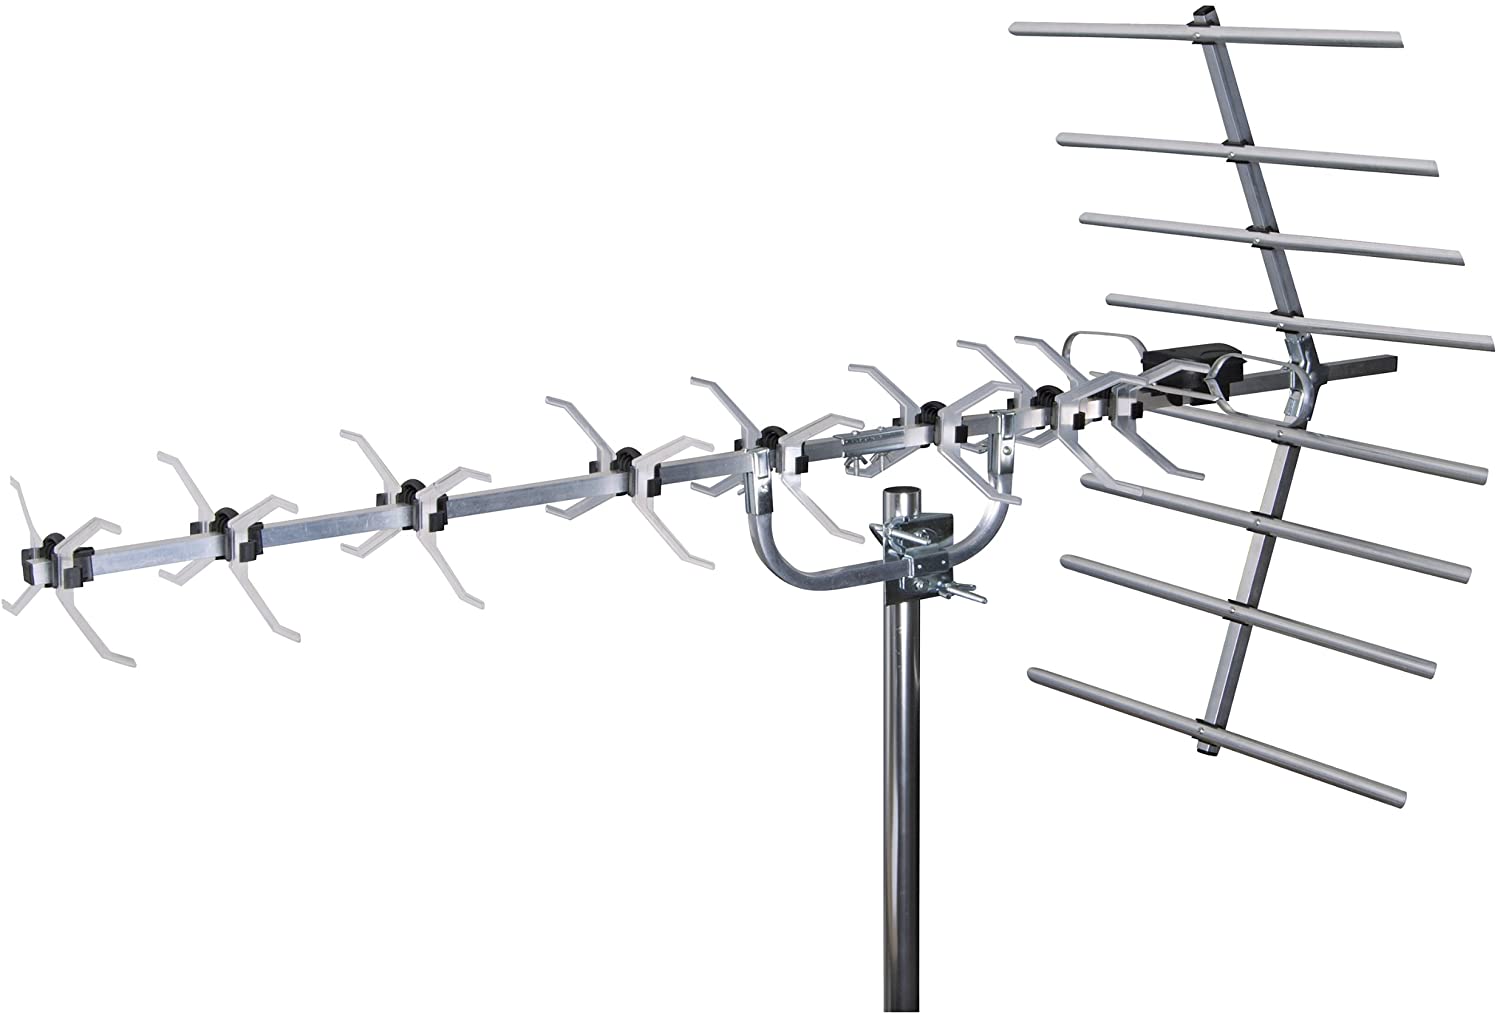 The Prime 27884D4 4G Filtered Loft & Outdoor 48 Element Aerial By SLx